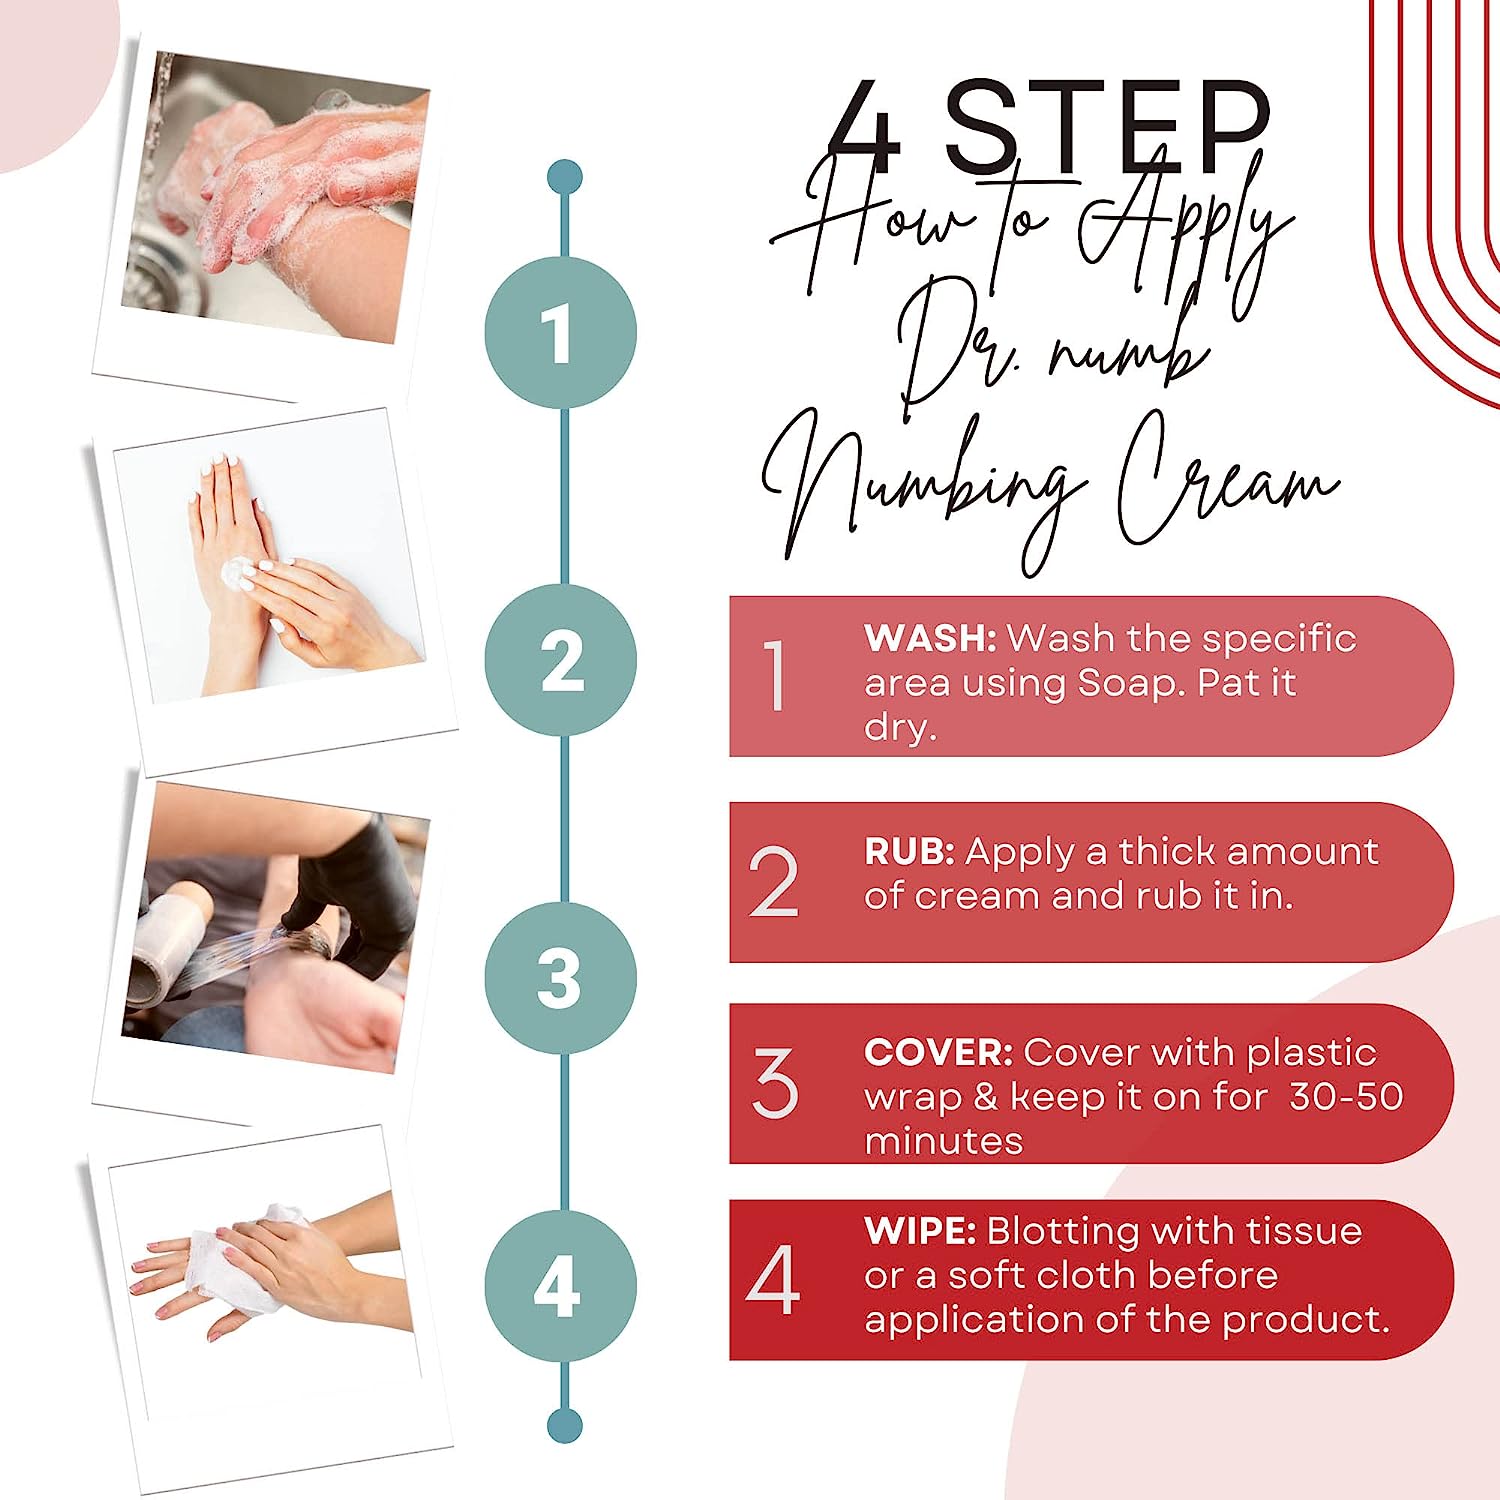 Numbing cream for waxing - Wax without the discomfort